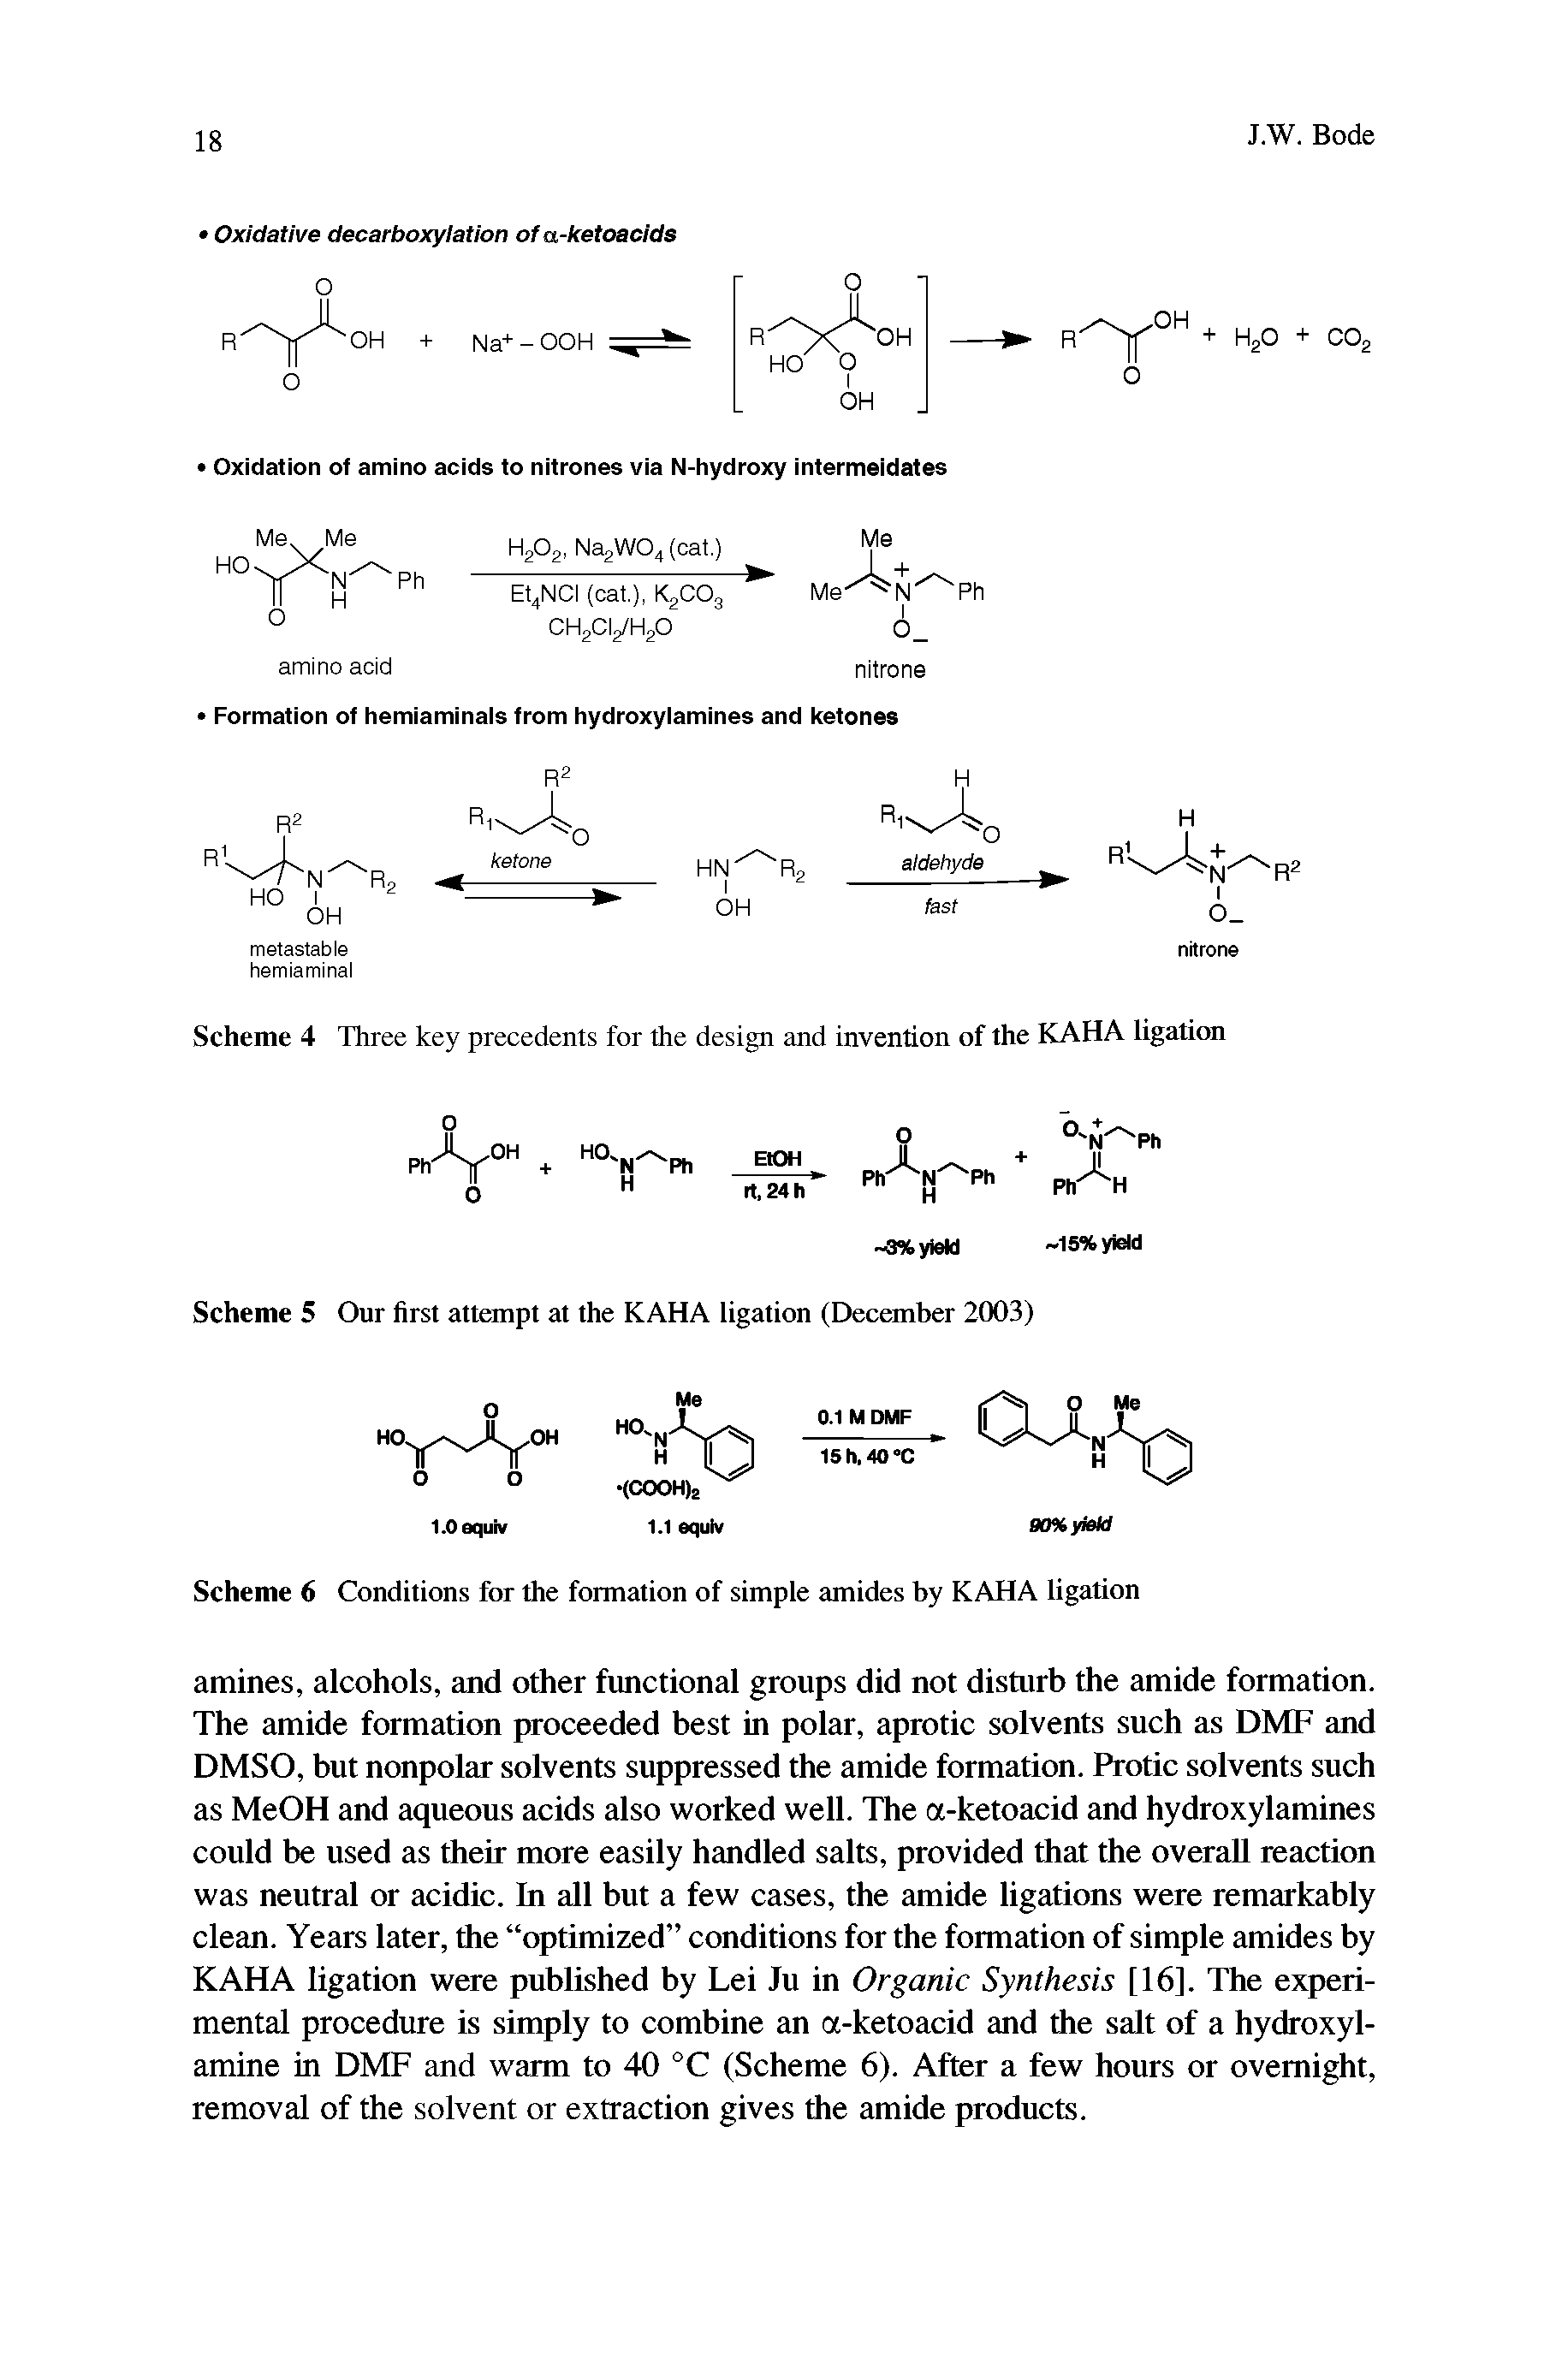 Scheme 6 Conditions for the formation of simple amides by KAHA ligation...